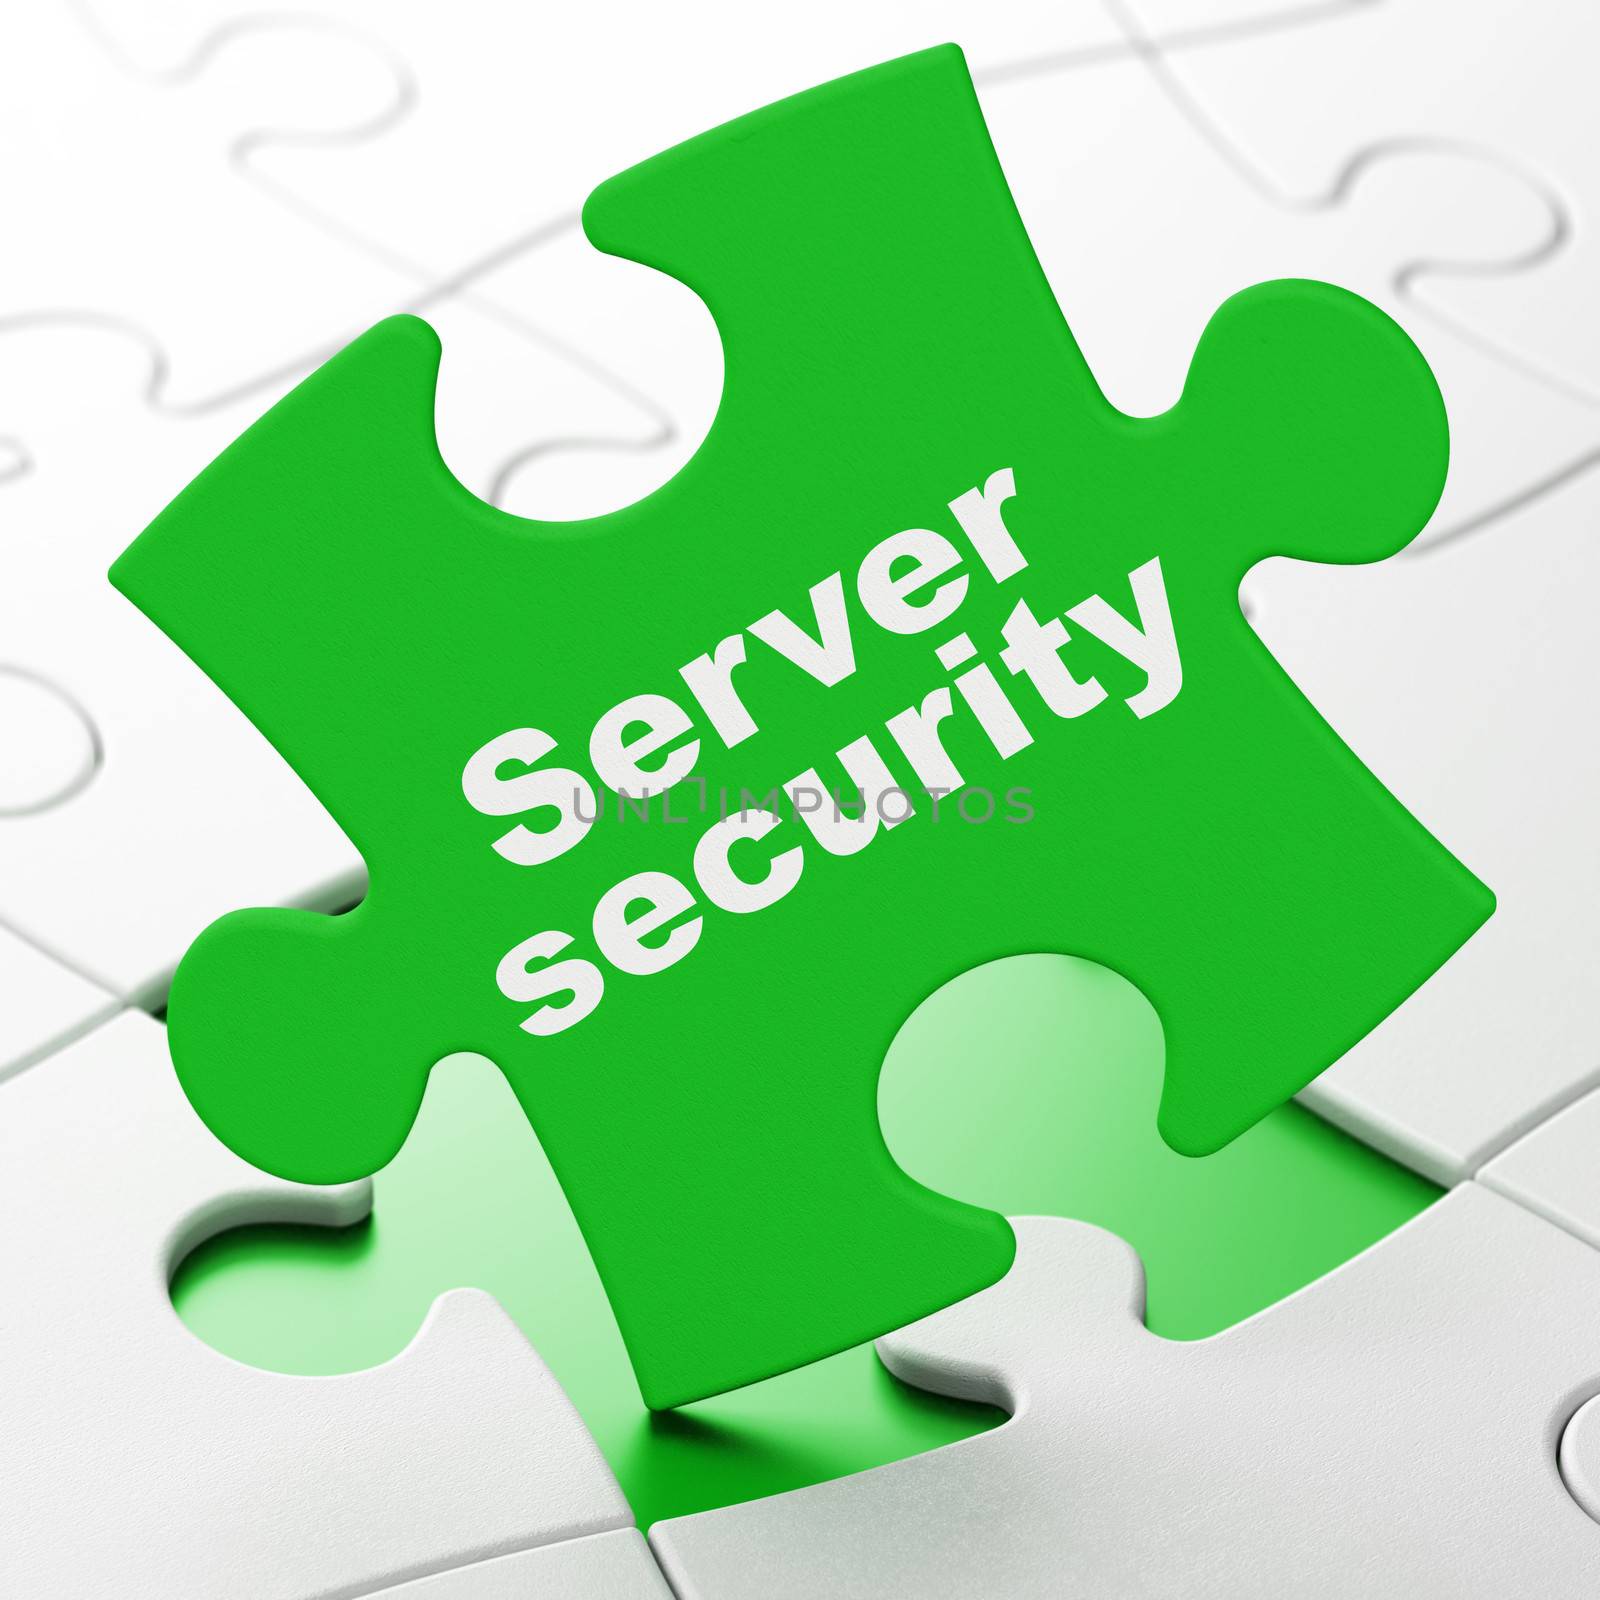 Security concept: Server Security on Green puzzle pieces background, 3d render